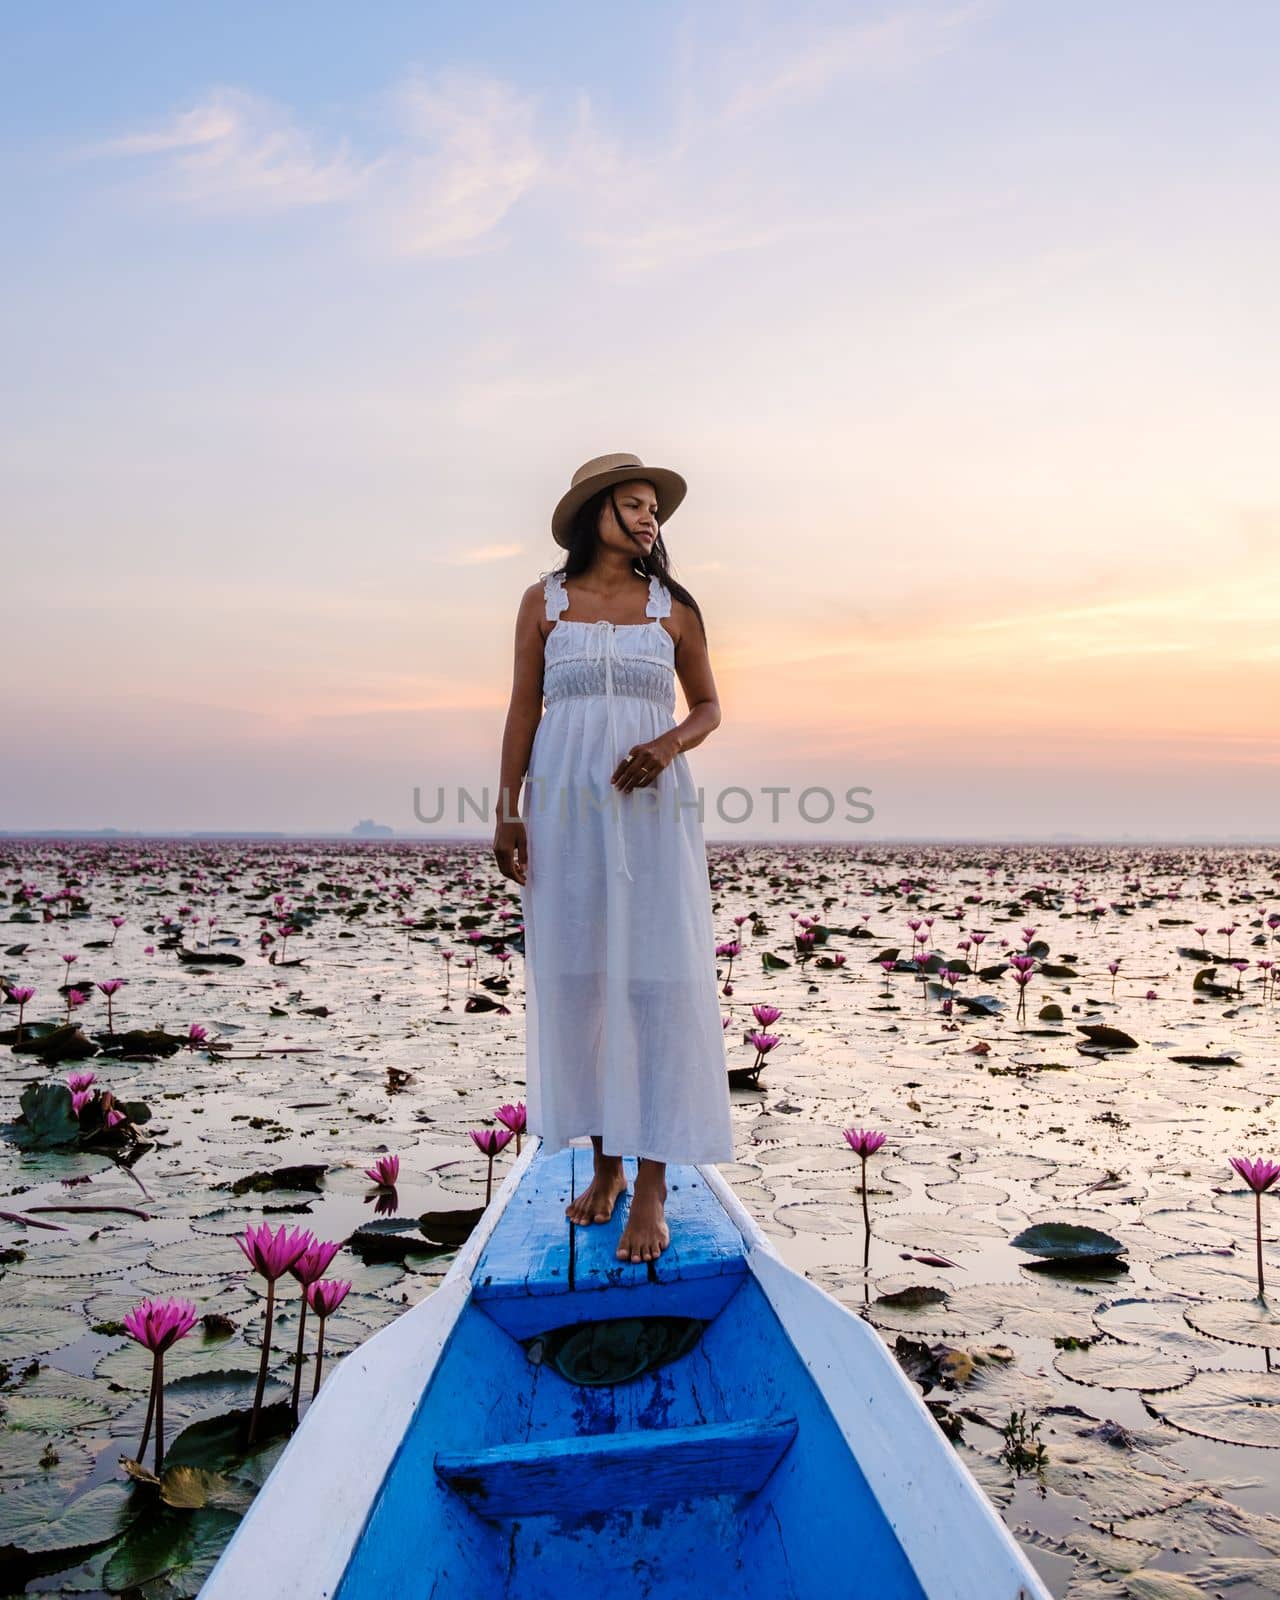 Asian women in a boat at the Red Lotus Sea in Udon Thani Thailand. by fokkebok